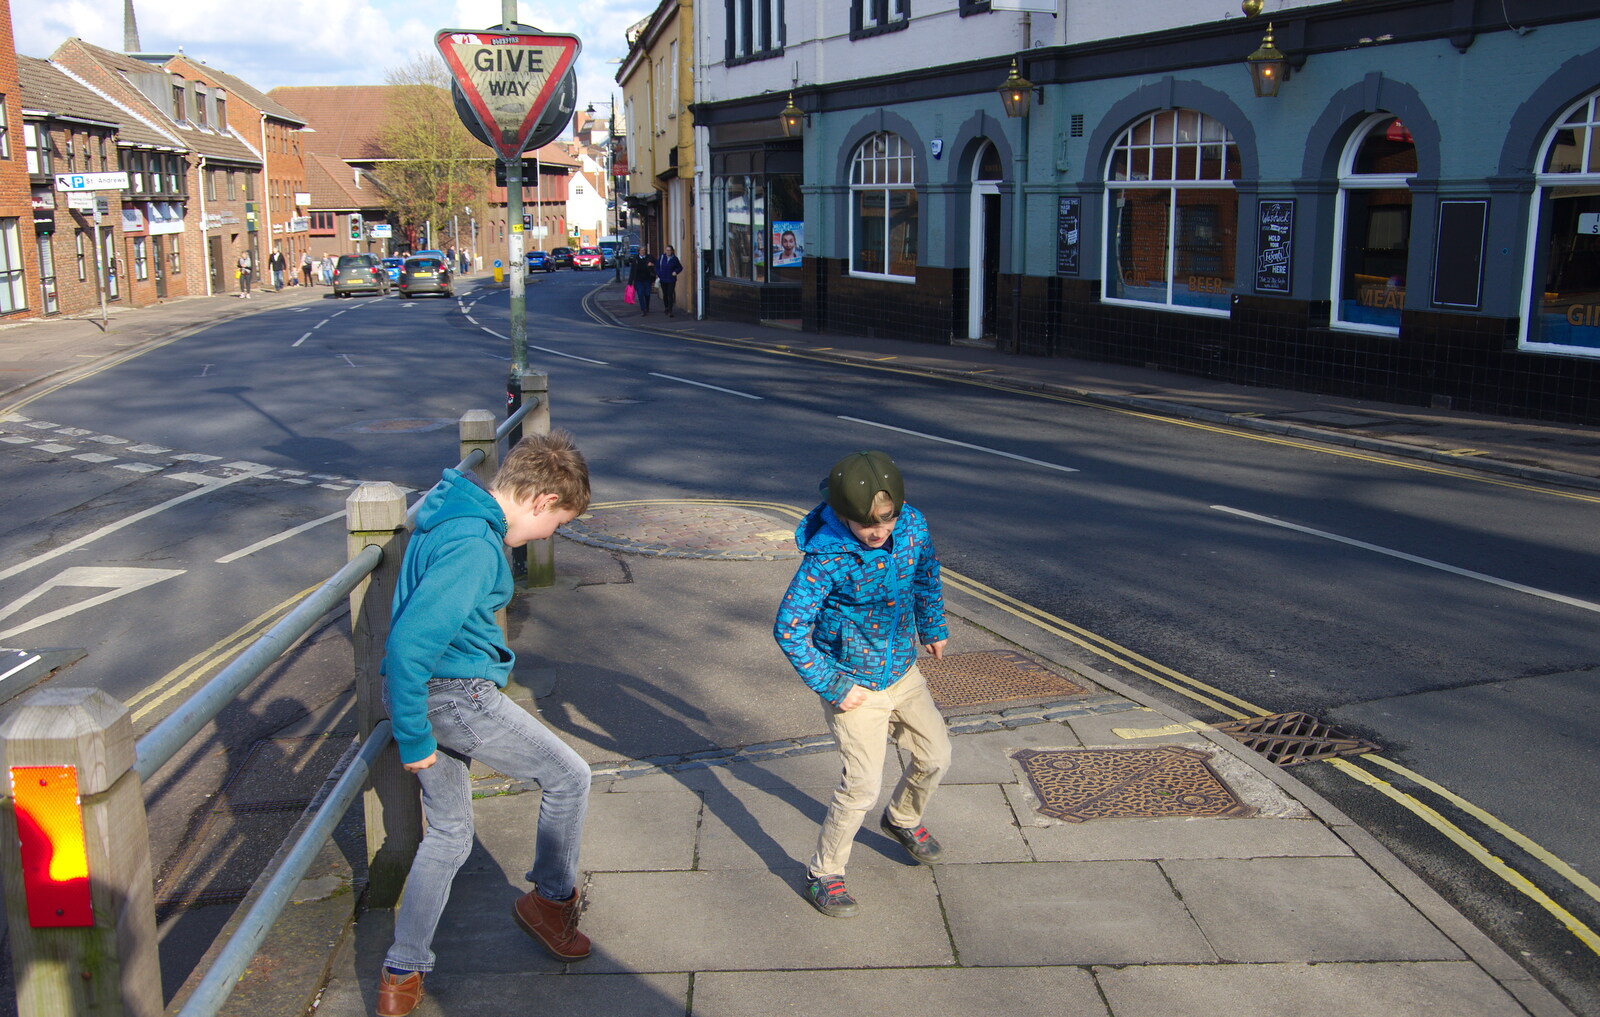 The boys dance around at the top of St. Benedict's Street from Singing in John Lewis, Norwich, Norfolk - 13th April 2019